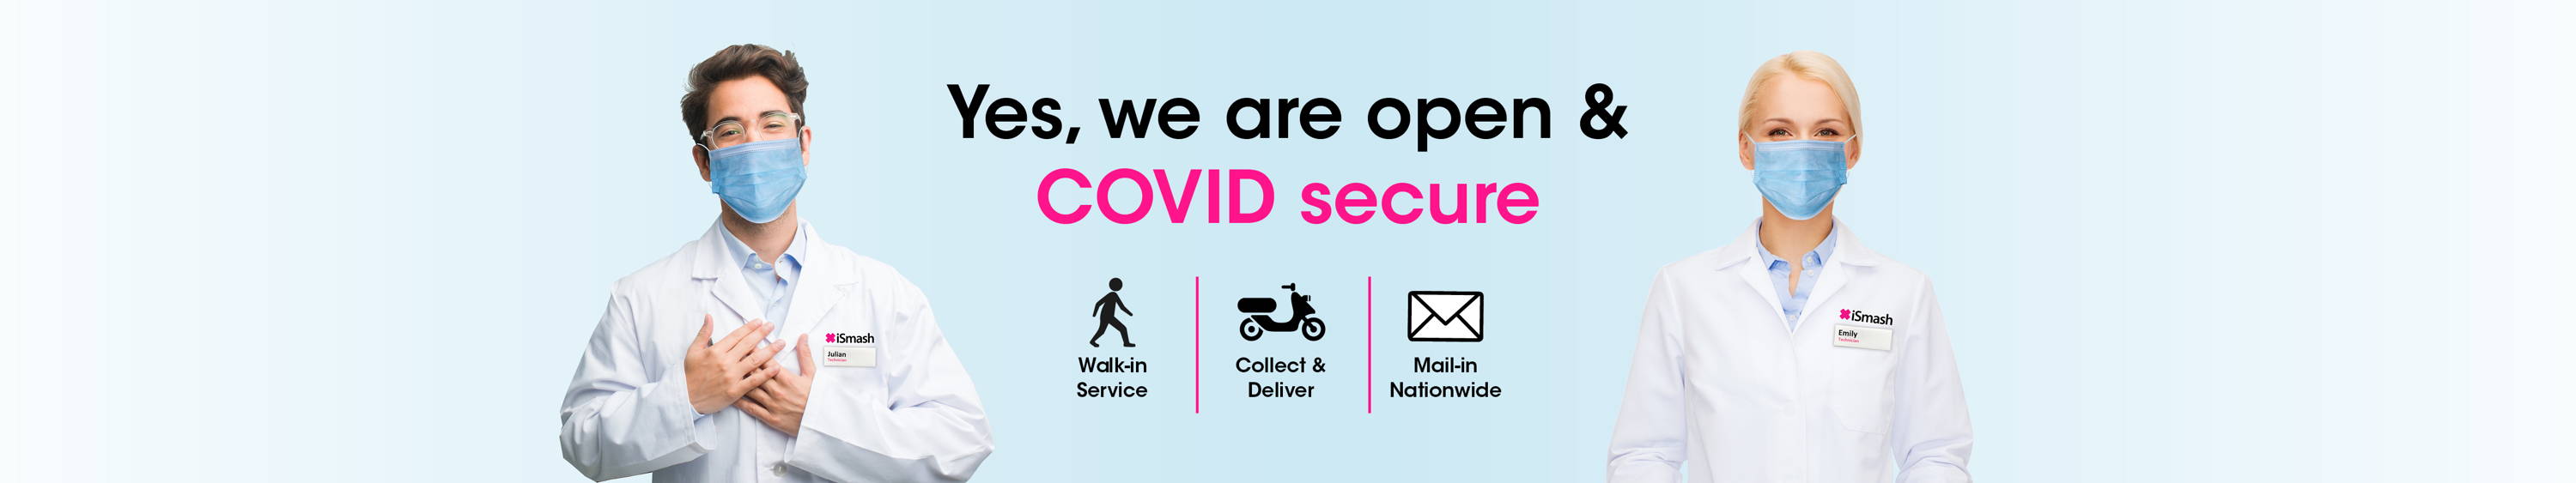 yes, we are open and covid secure